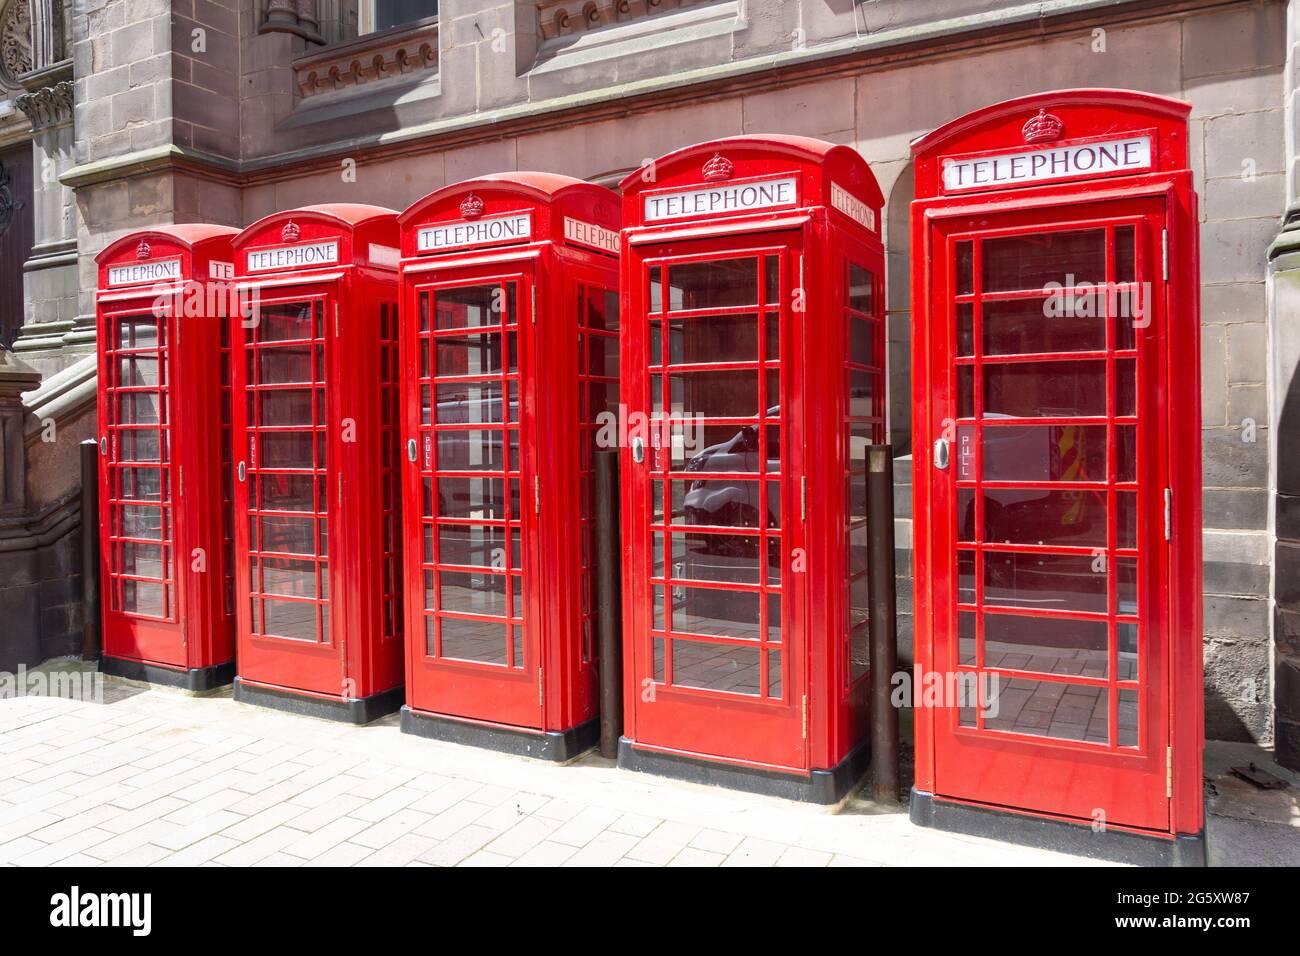 Row of red telephone boxes, Dunning Street, Middlesbrough, North Yorkshire, England, United Kingdom Stock Photo